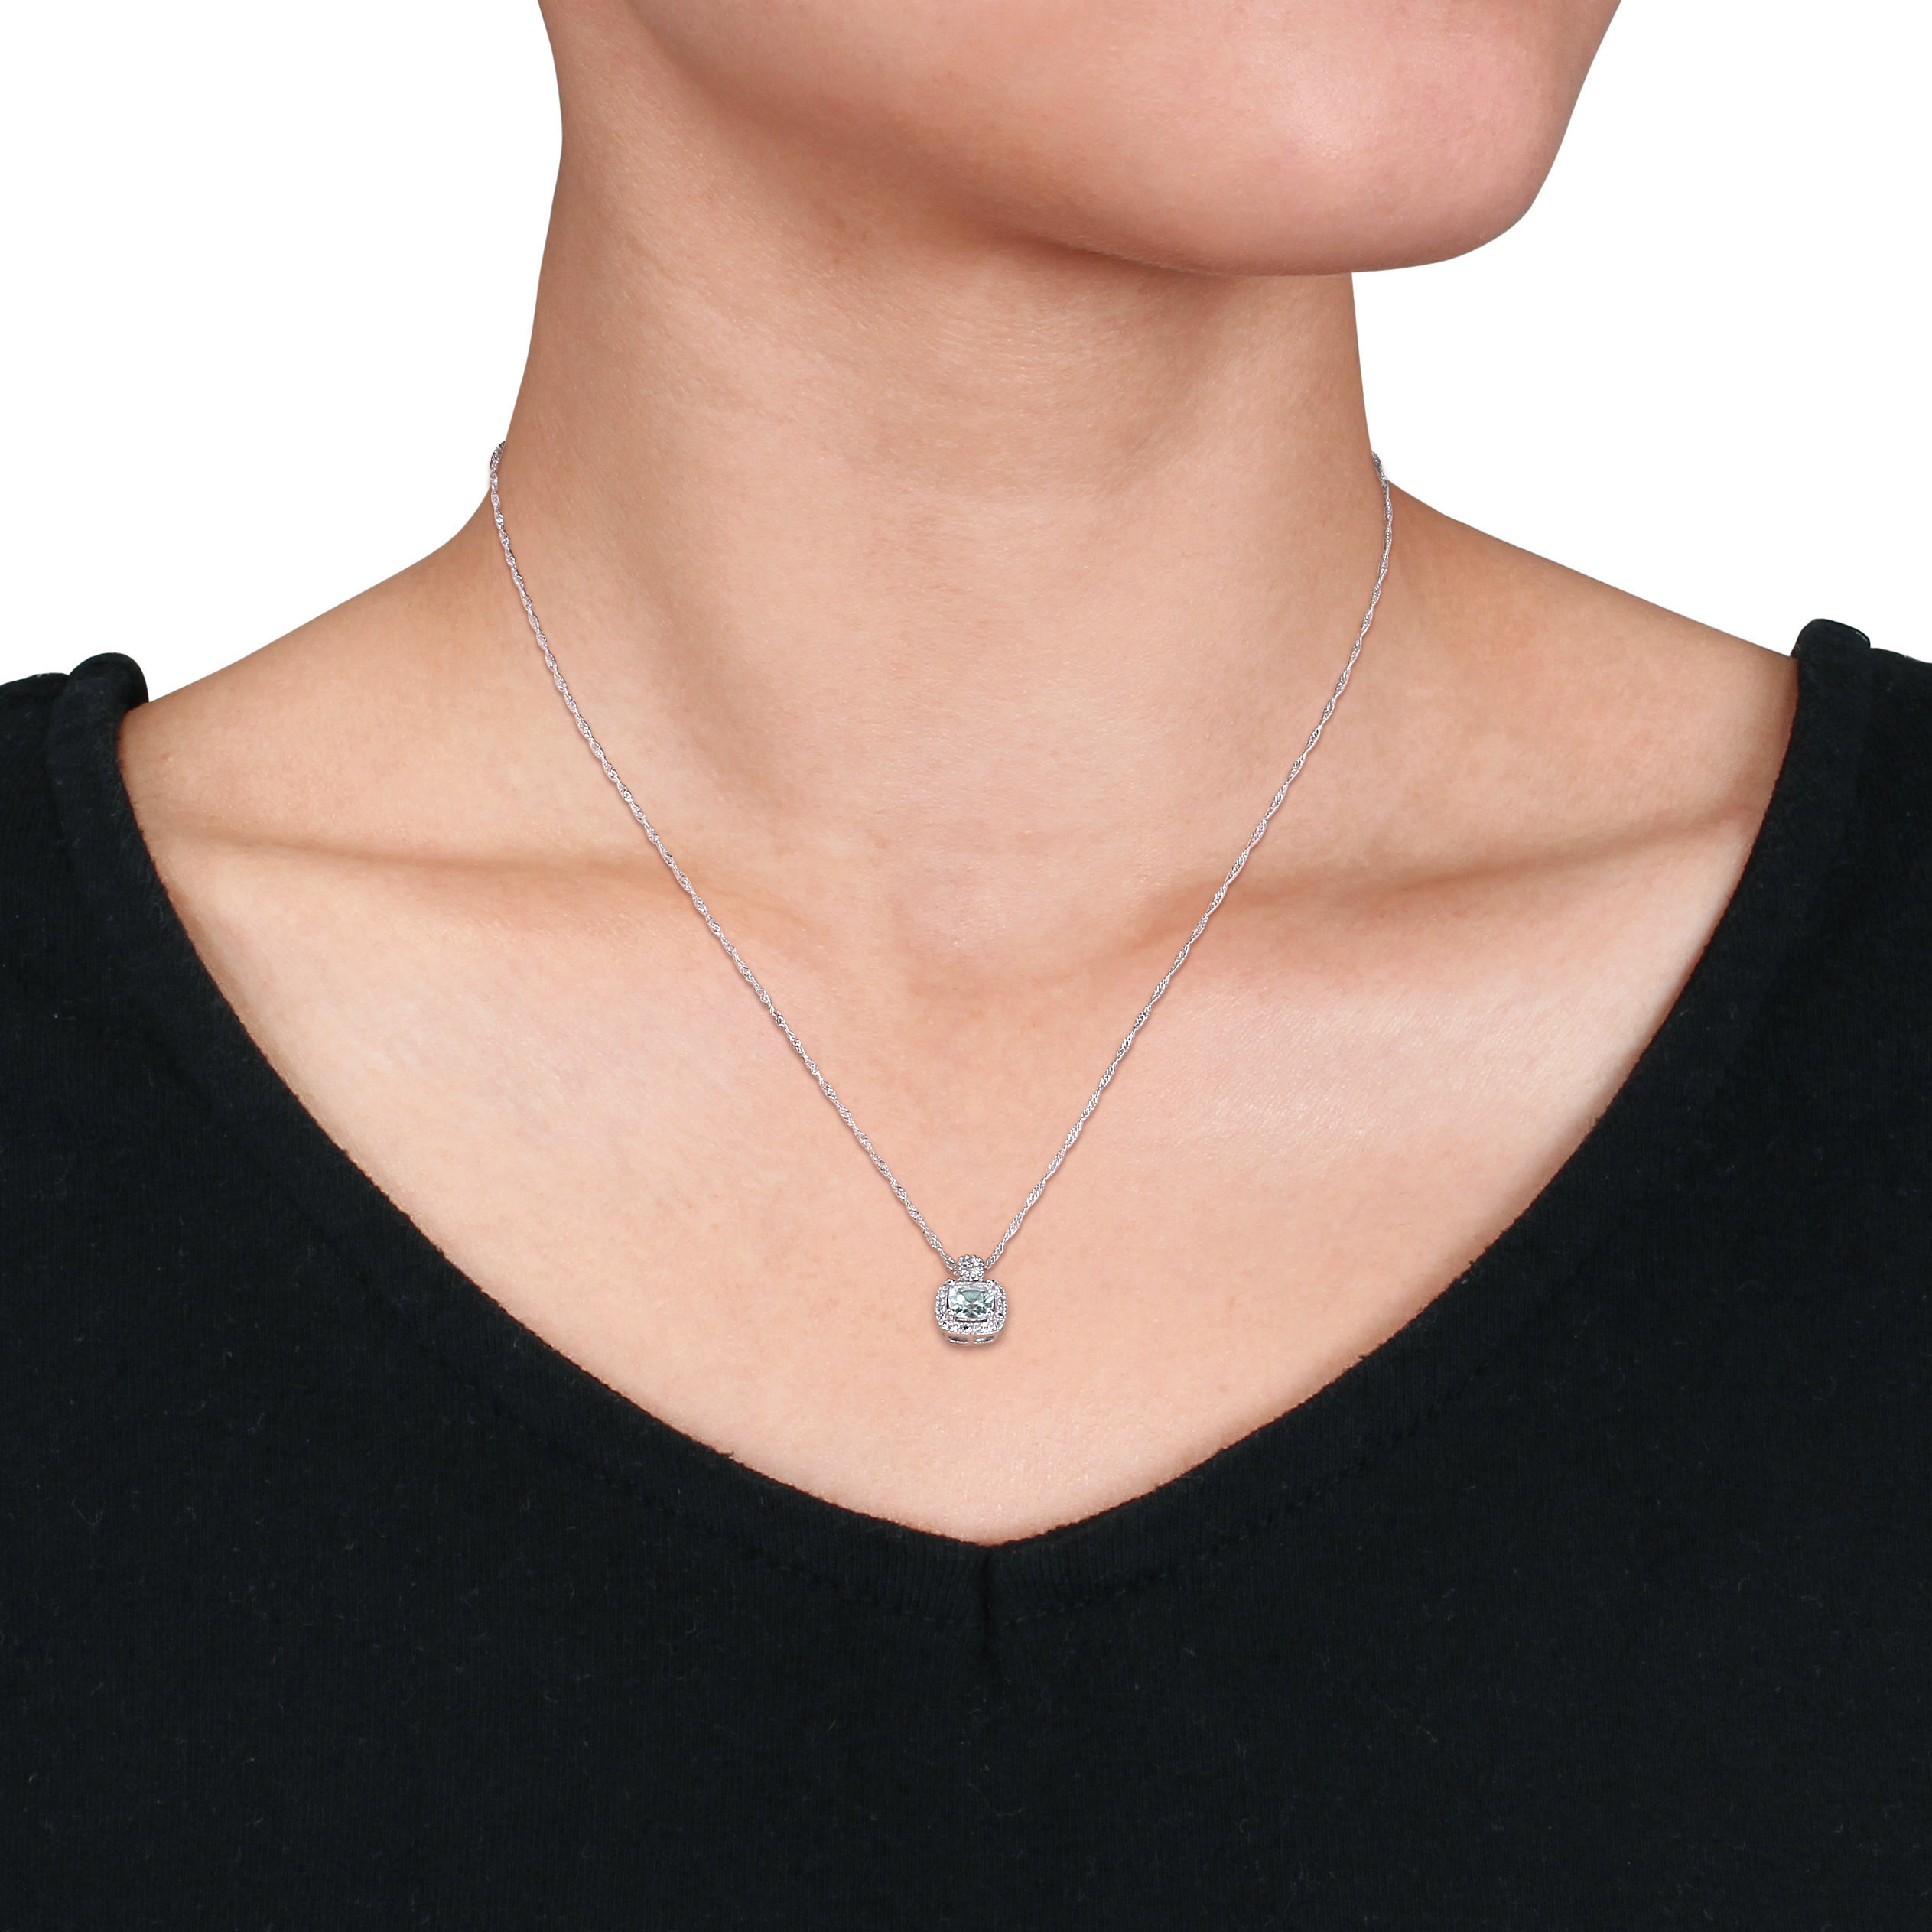 Cushion Cut Aquamarine and 1/10 CT TW Diamond Pendant with Chain in 10k White Gold - 17 in.